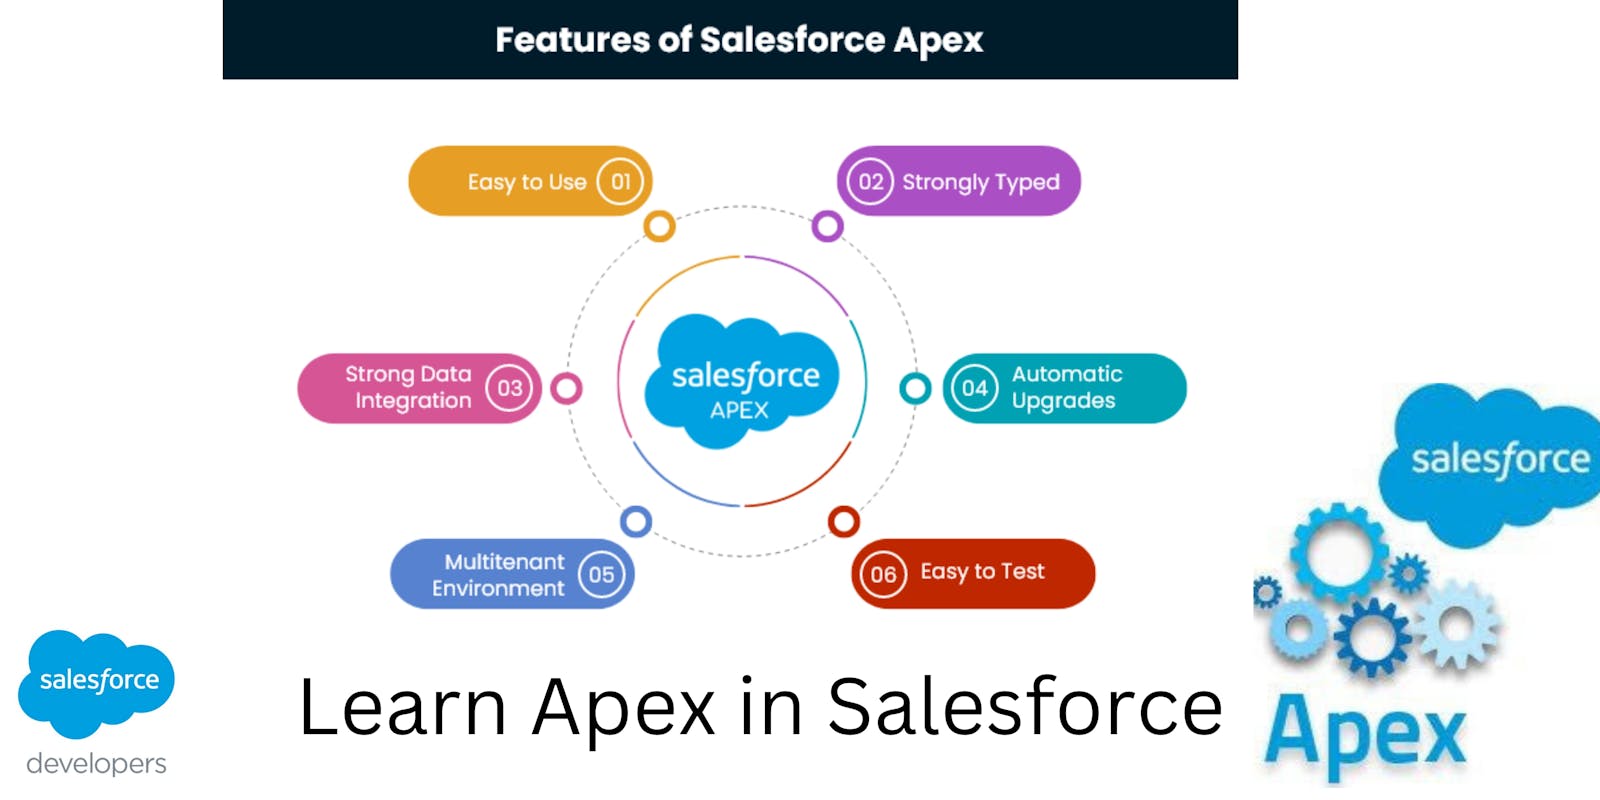 Learn Apex in Salesforce: Free Courses and Resources for Beginners